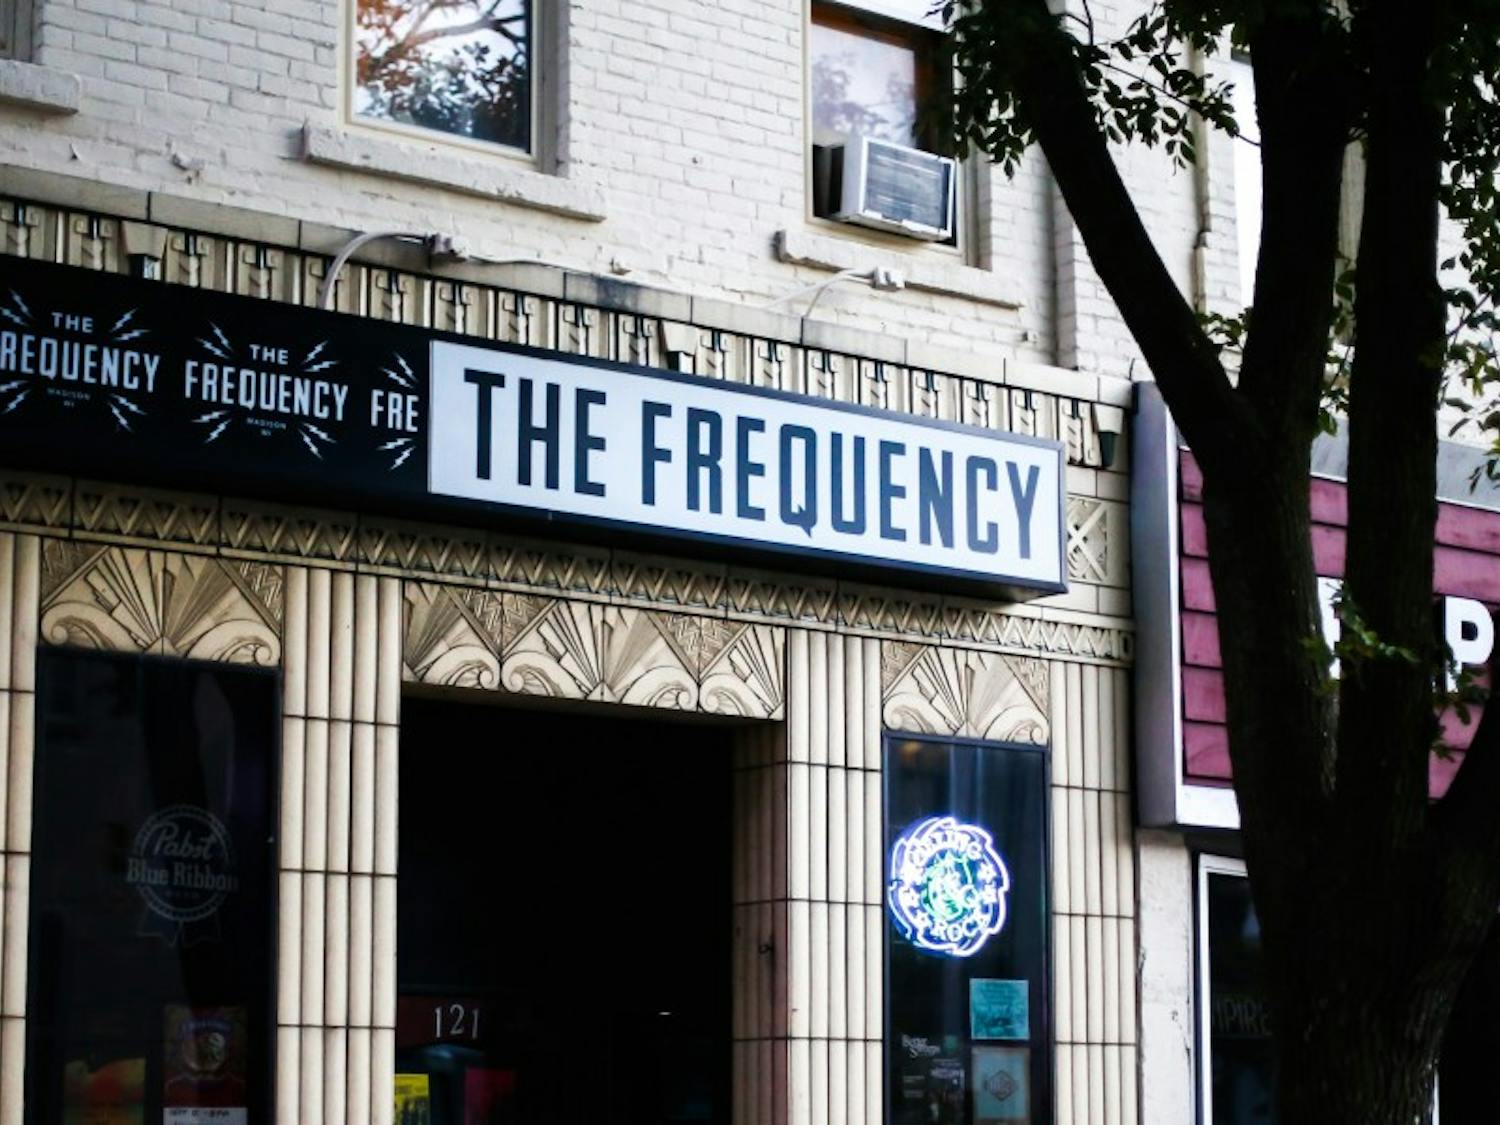 Snakes on the Lake organizers selected popular Madison location The Frequency as the 2016 venue.&nbsp;